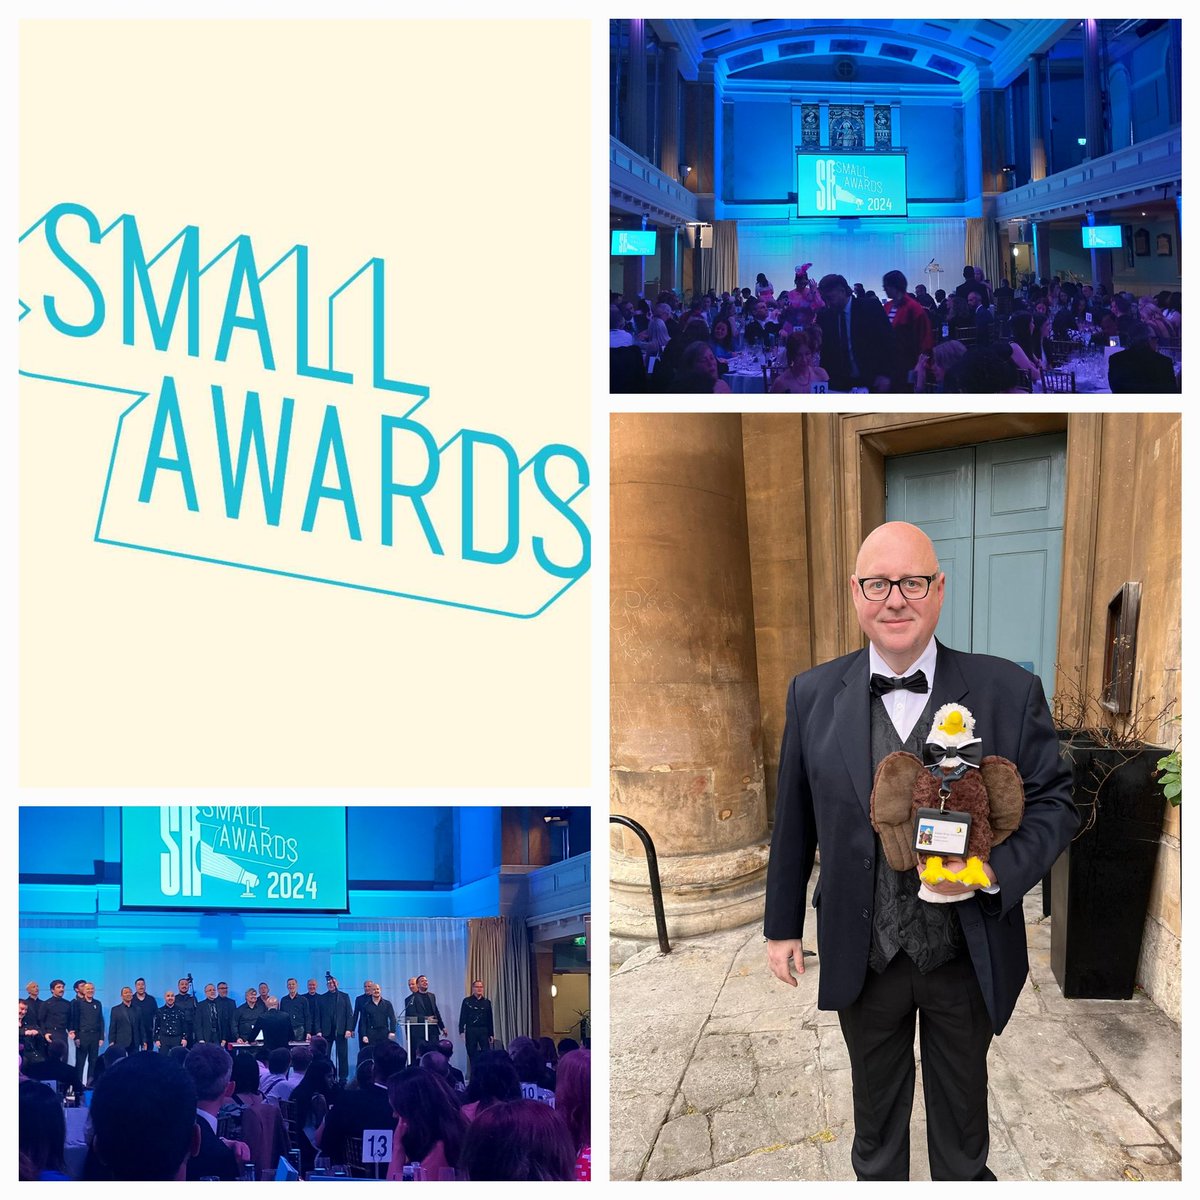 The Small Awards
We did not win our category, congratulations to winners it was good to celebrate small businesses excellence in the UK
#Awards #BusinessAwards
@britainsmallbiz @TheSmallAwards  #DisabilityConsultant #TurningDisabledToEnabled lnkd.in/eQU5XDSQ